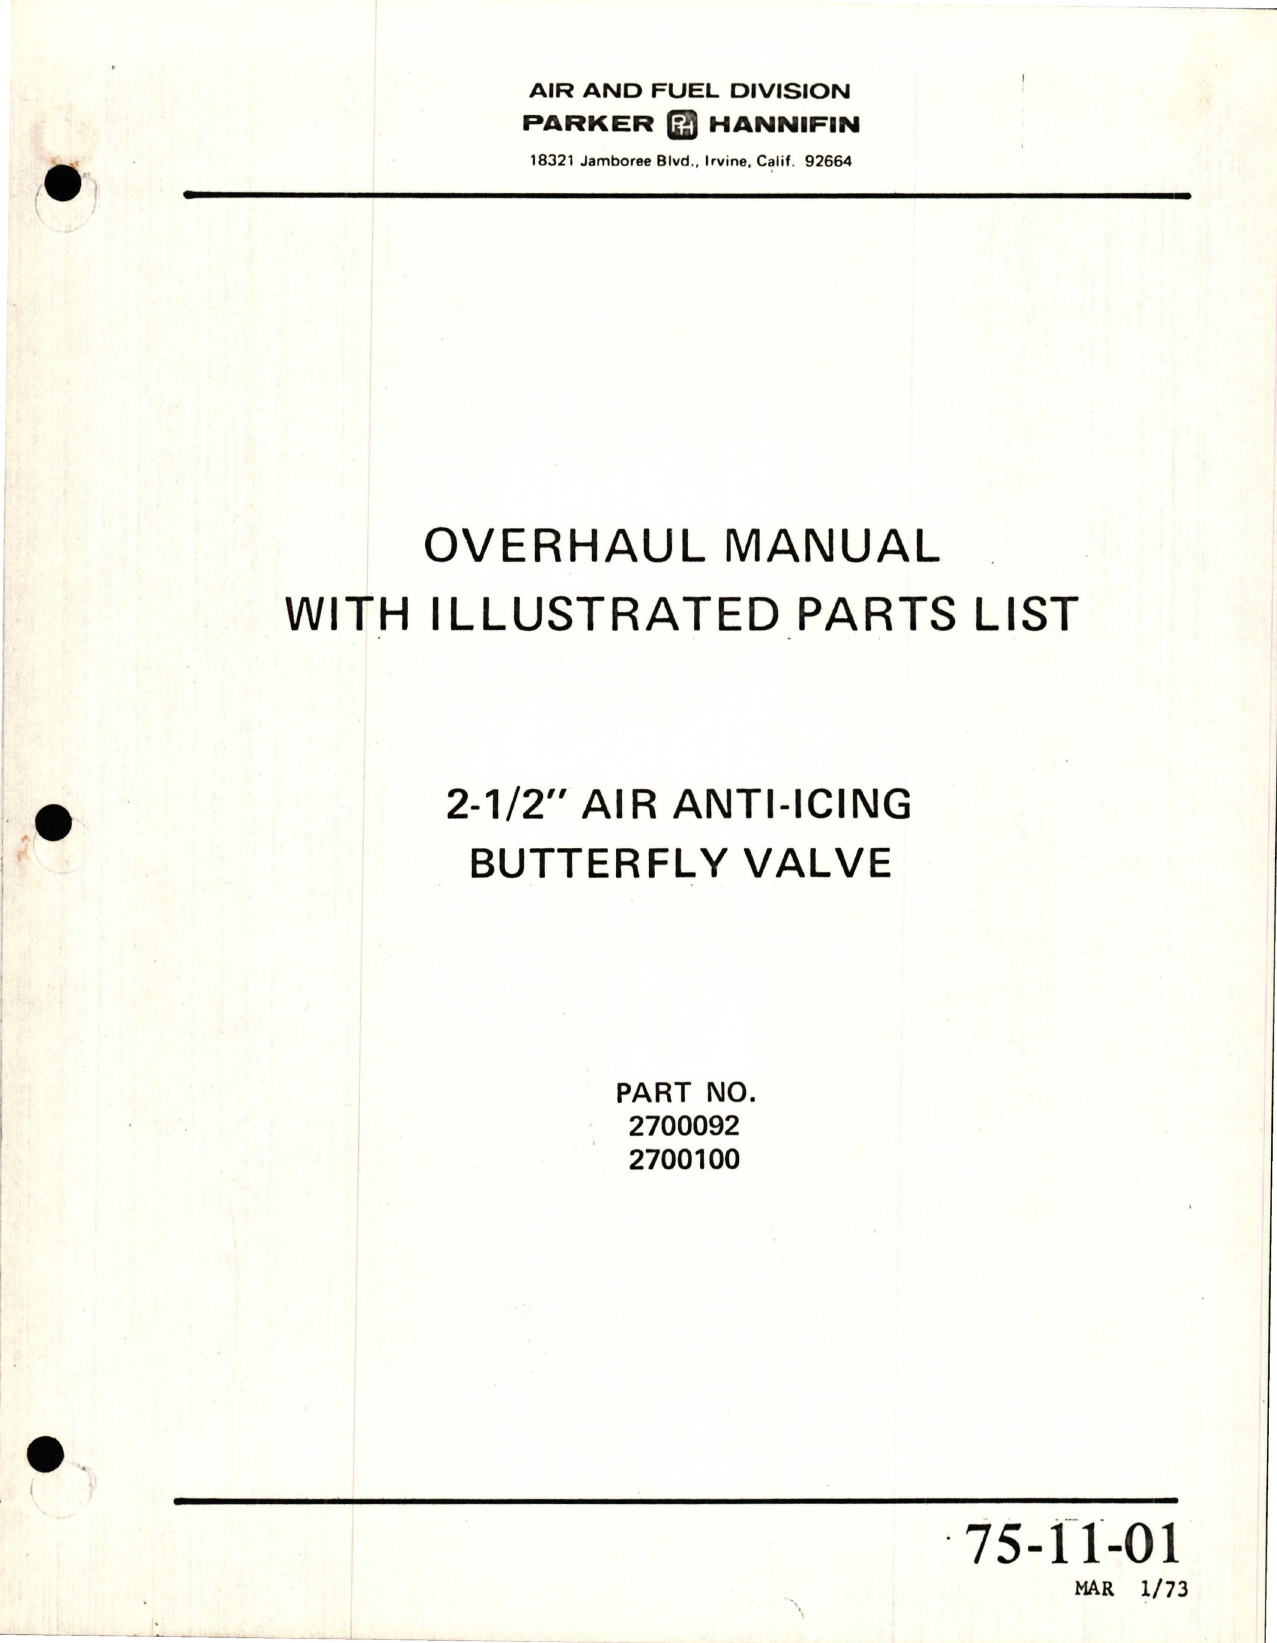 Sample page 1 from AirCorps Library document: Overhaul with Illustrated Parts List for Air Anti-Icing Butterfly Valve 2 1/2